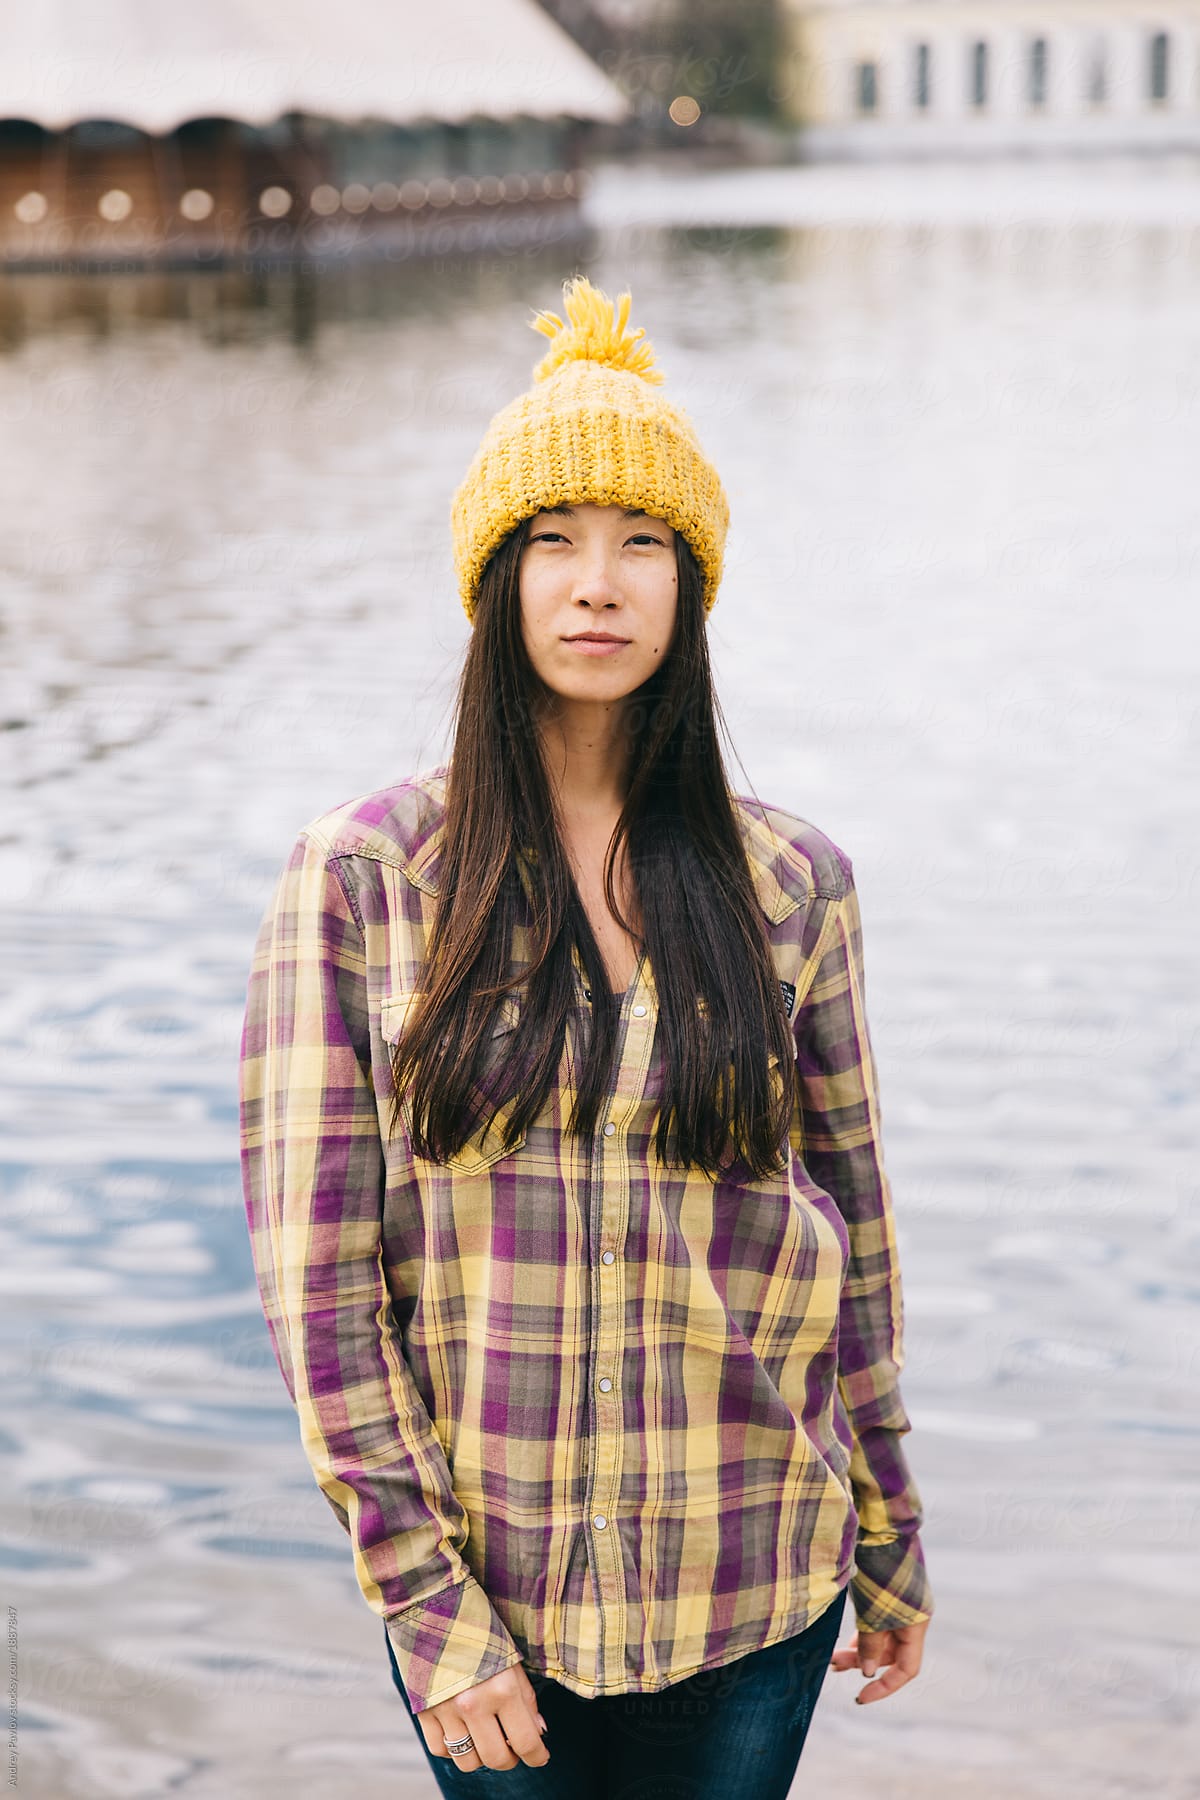 Portrait of a woman in knitted yellow hat and shirt